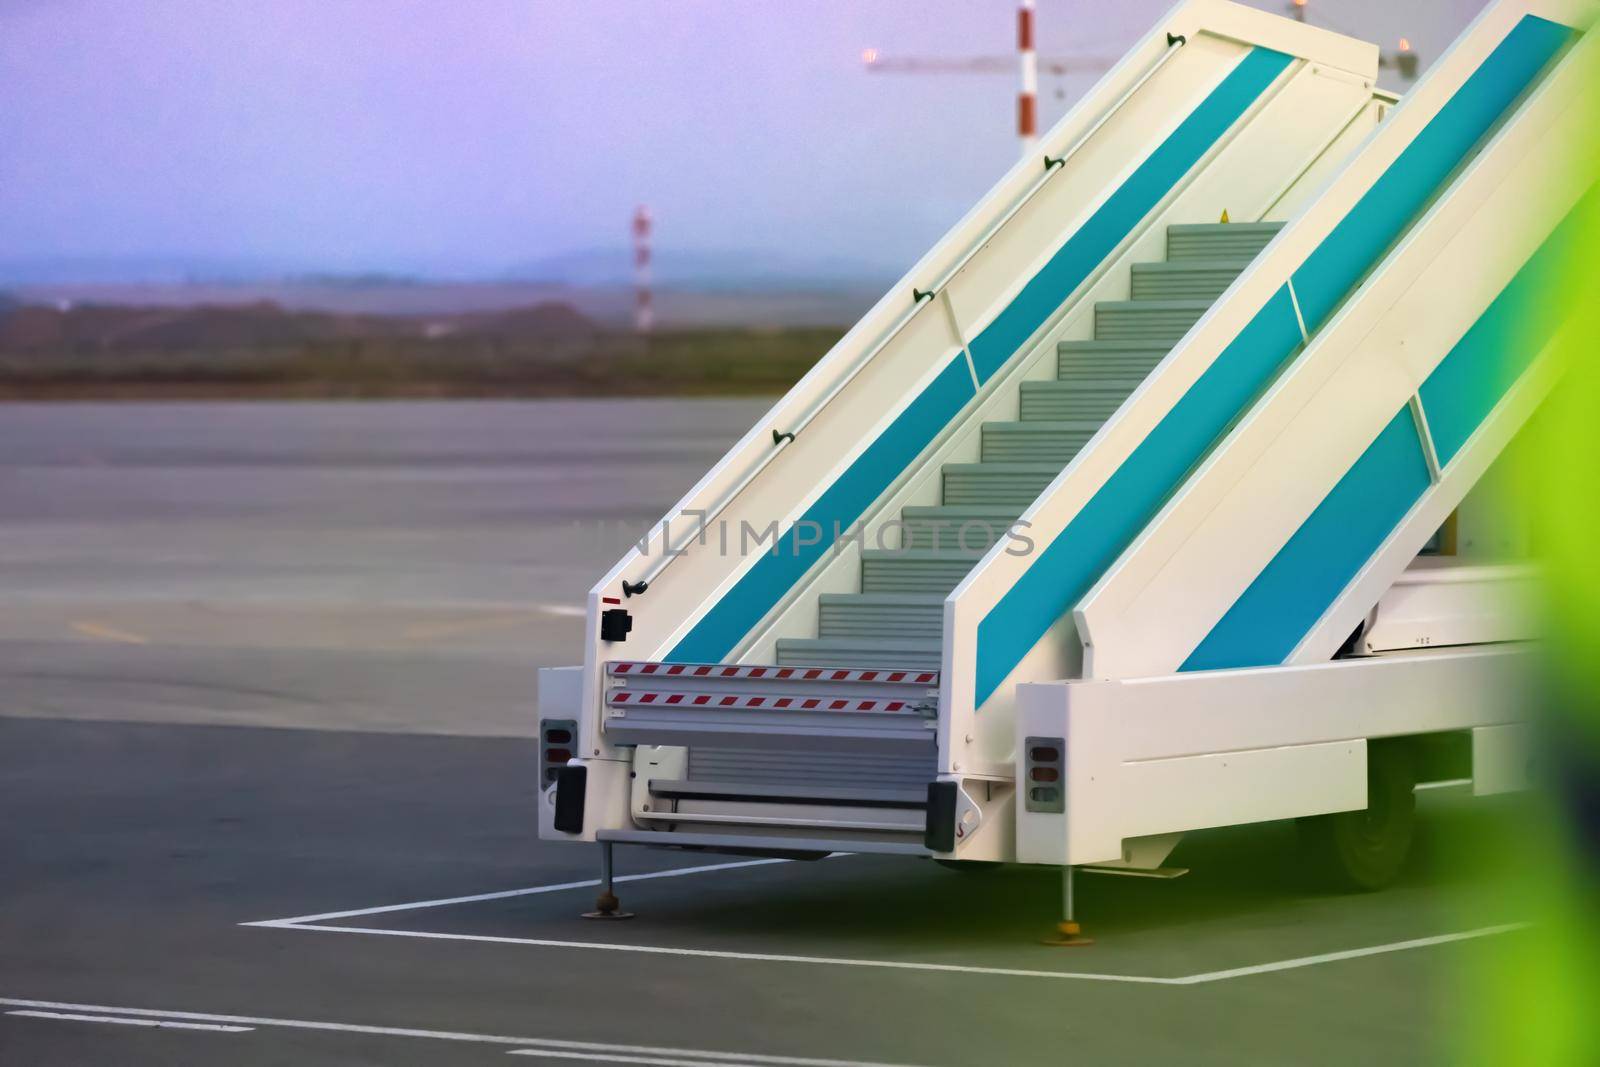 Plane ladder for disembarking and boarding passengers on board of the aircraft by Fabrikasimf